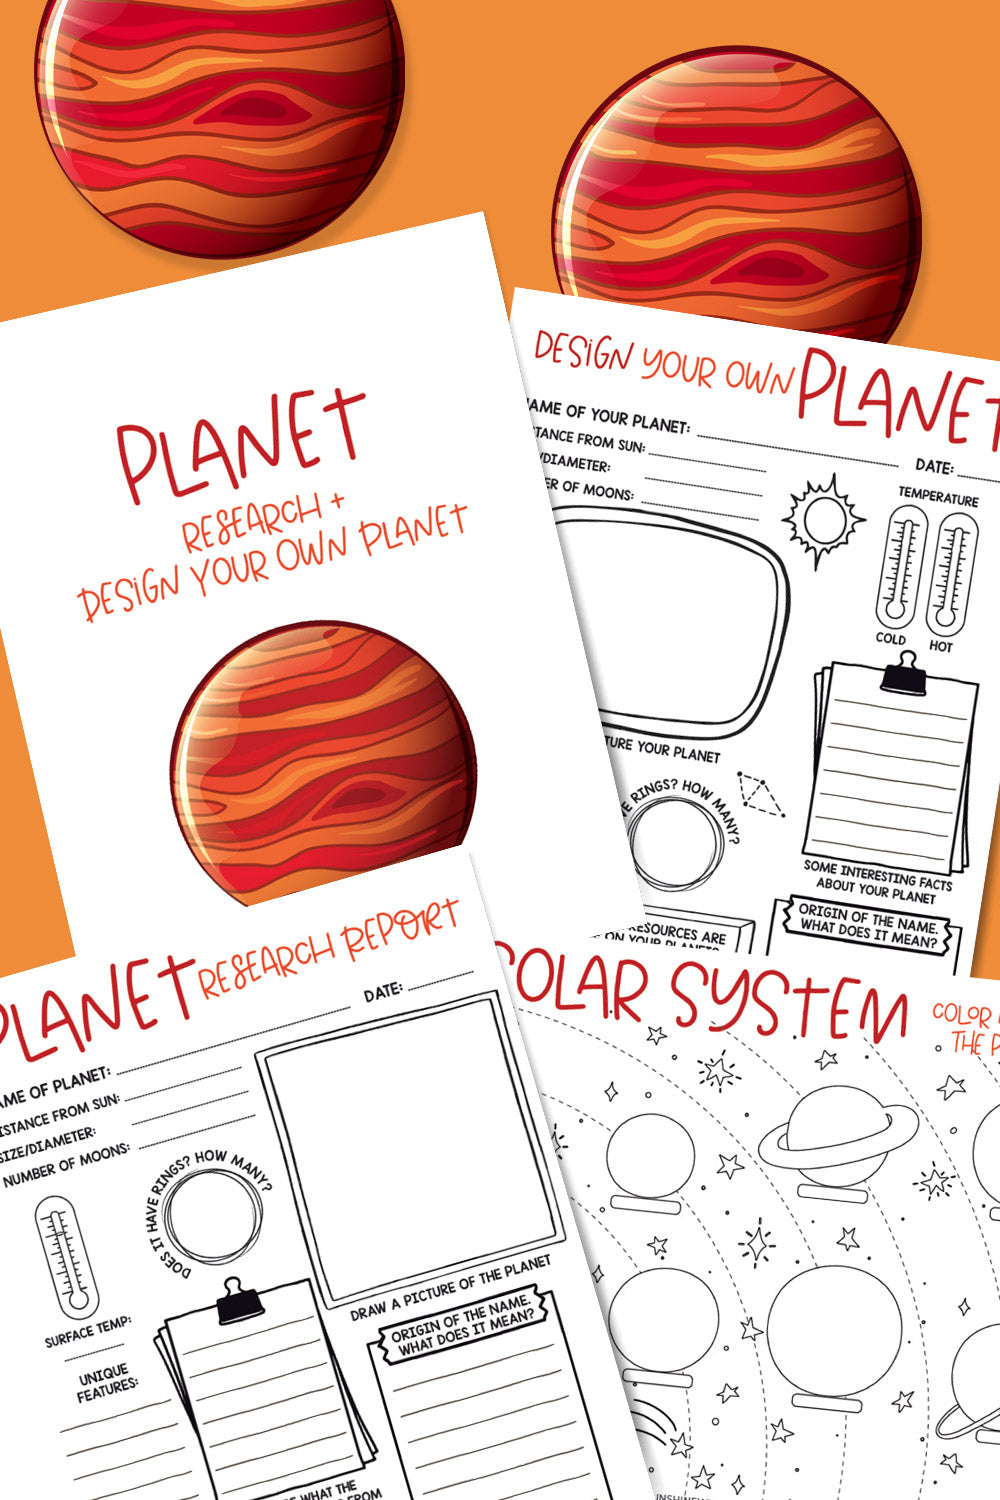 Planet Research and Design Your Own Planet Pack